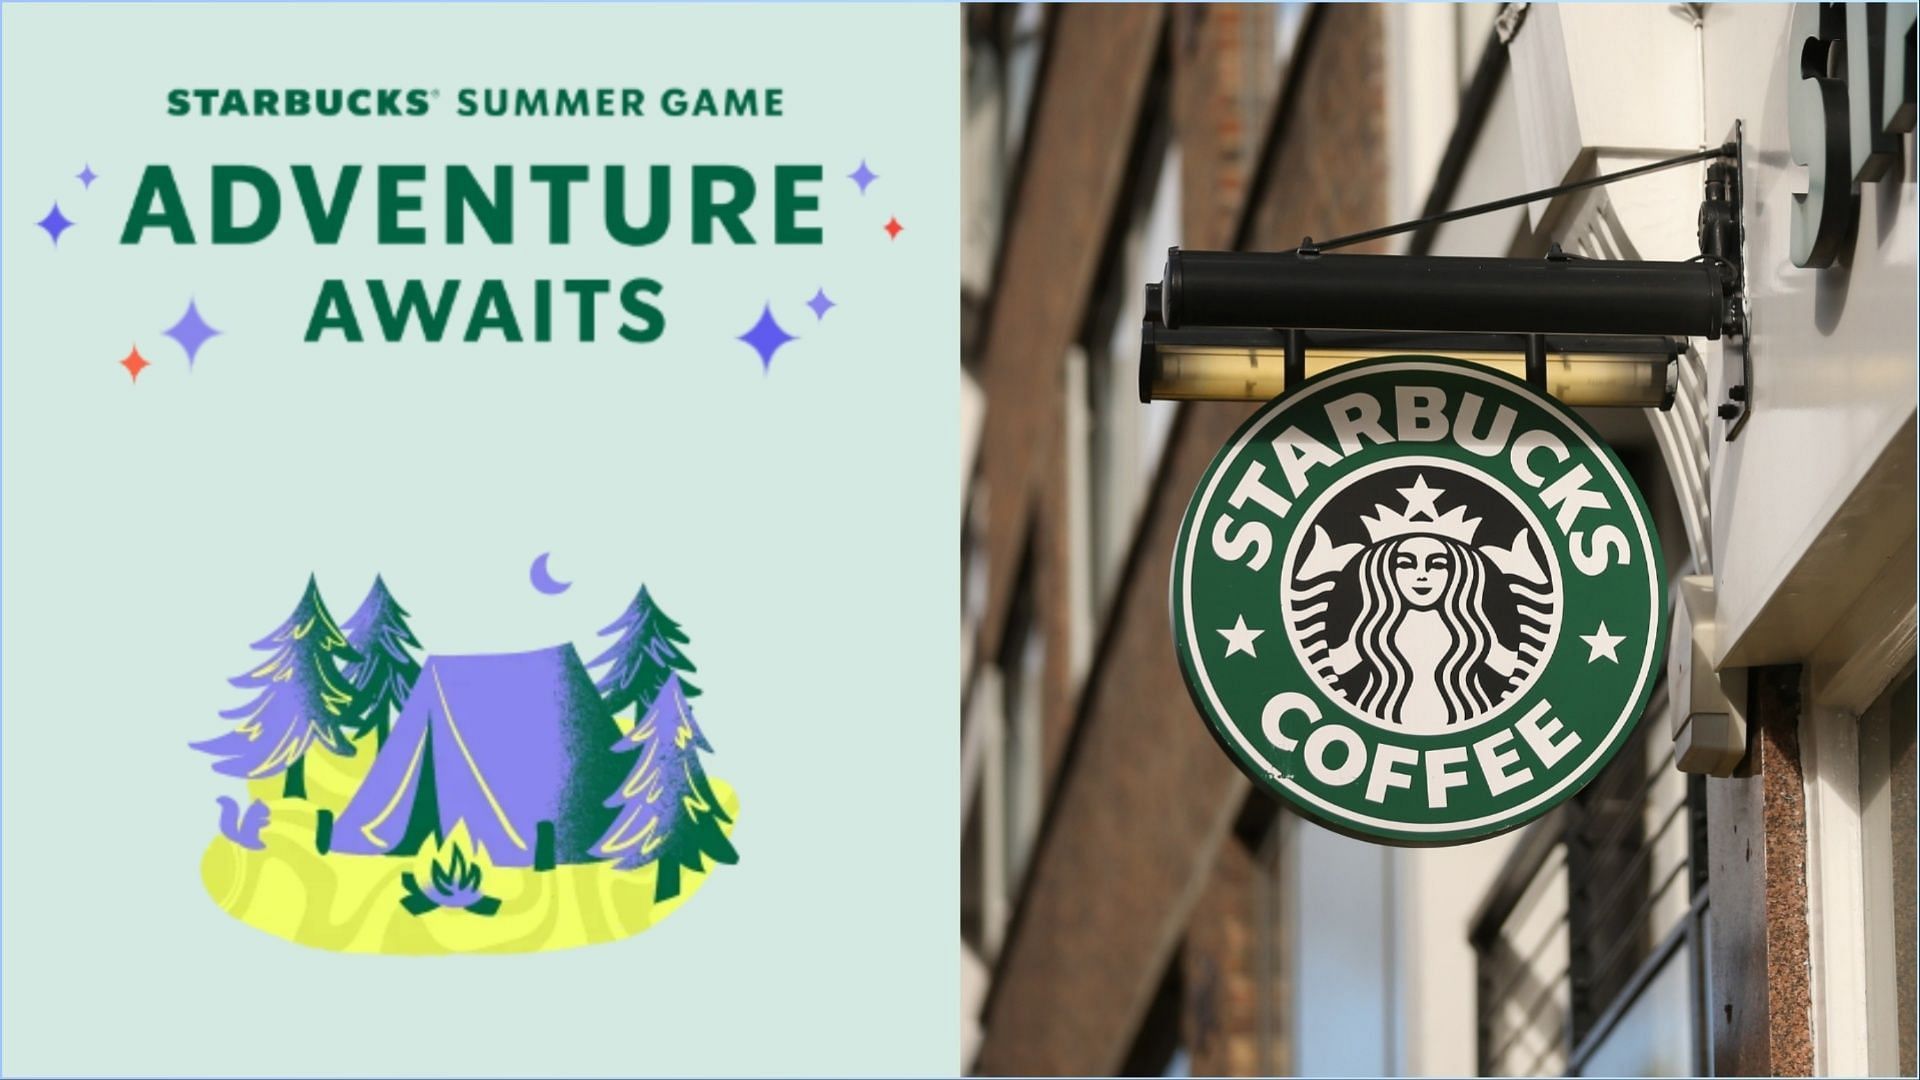 Starbucks is bringing back the Summer Games with over 10 million prizes up for grabs (Image via Oli Scarff/ Getty Images/ Starbucks)